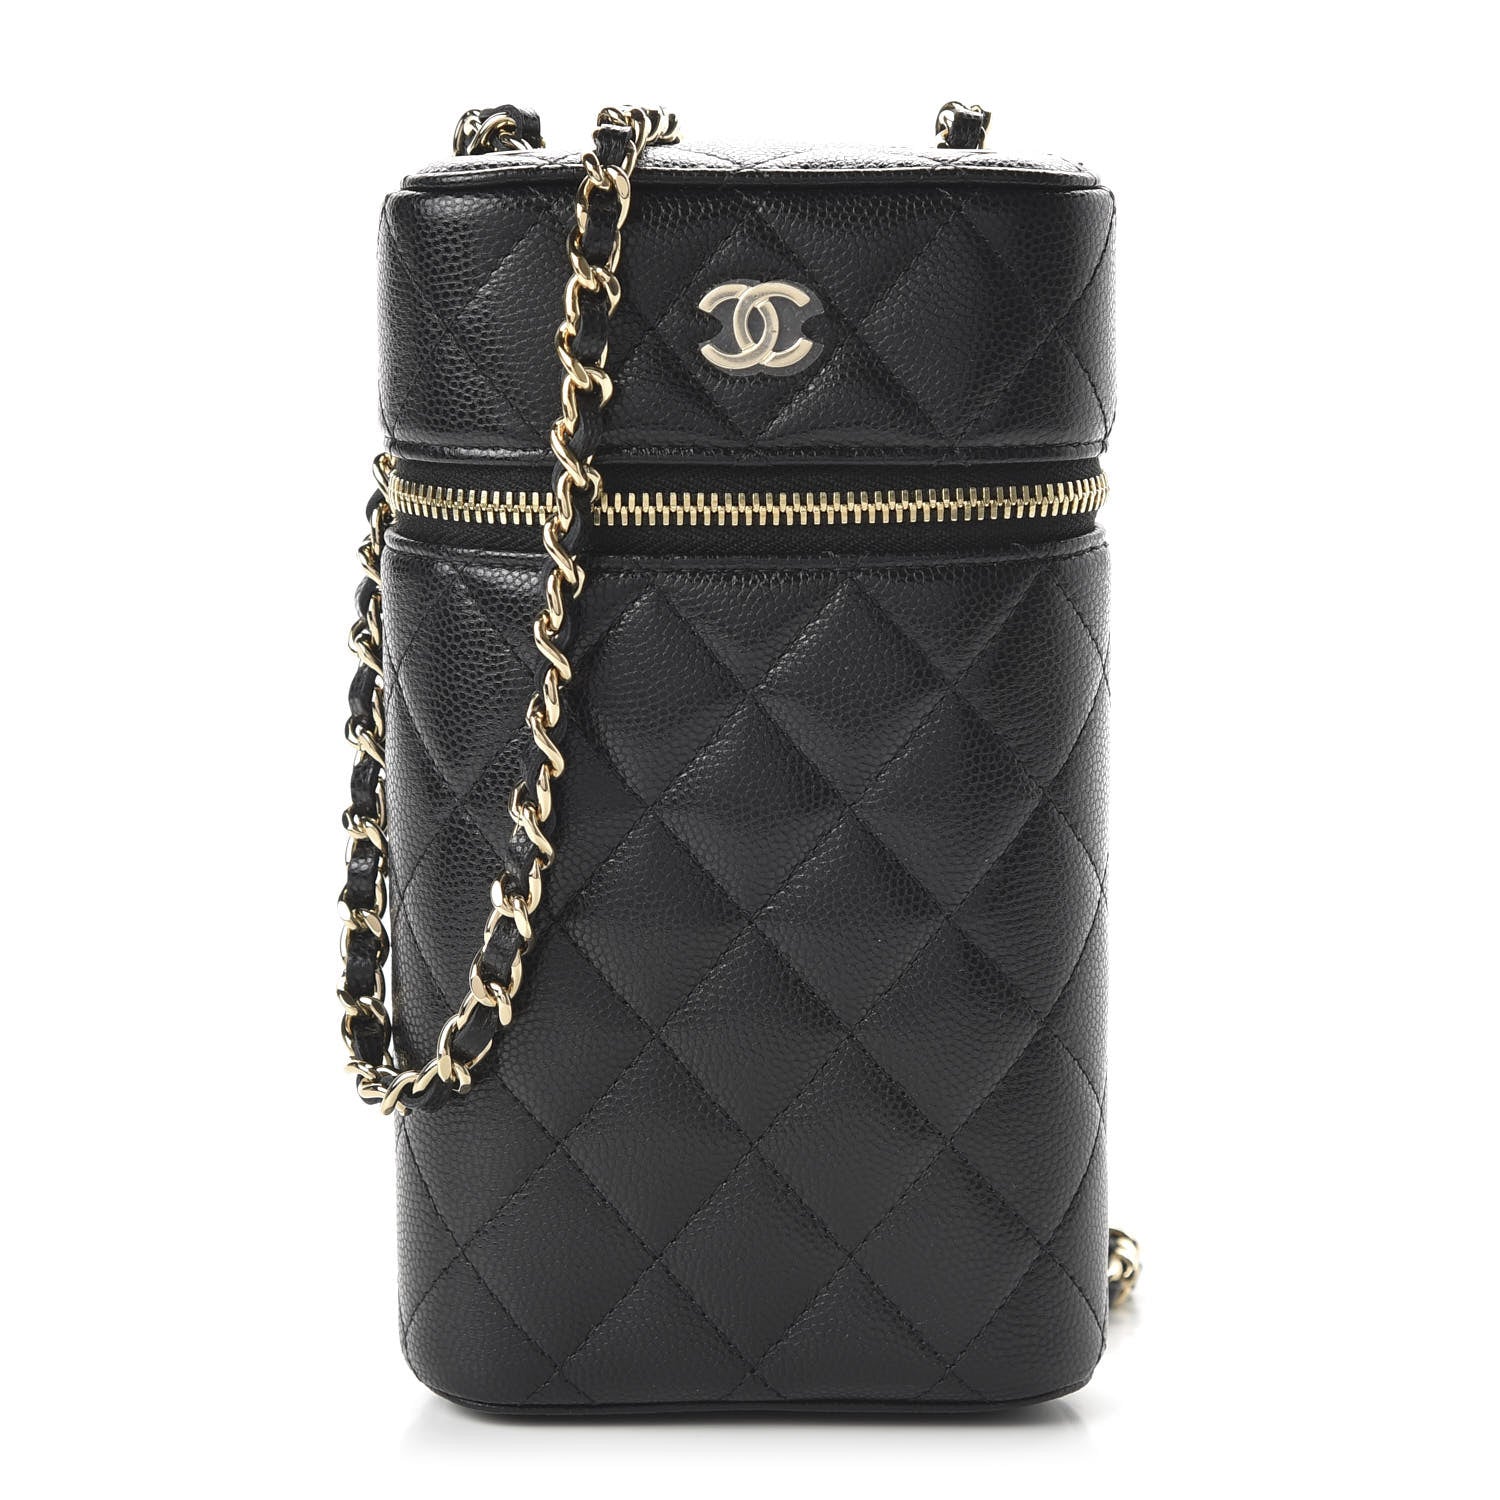 Chanel Classic Flap Phone Holder With Chain Black Caviar Gold Hardware –  Coco Approved Studio